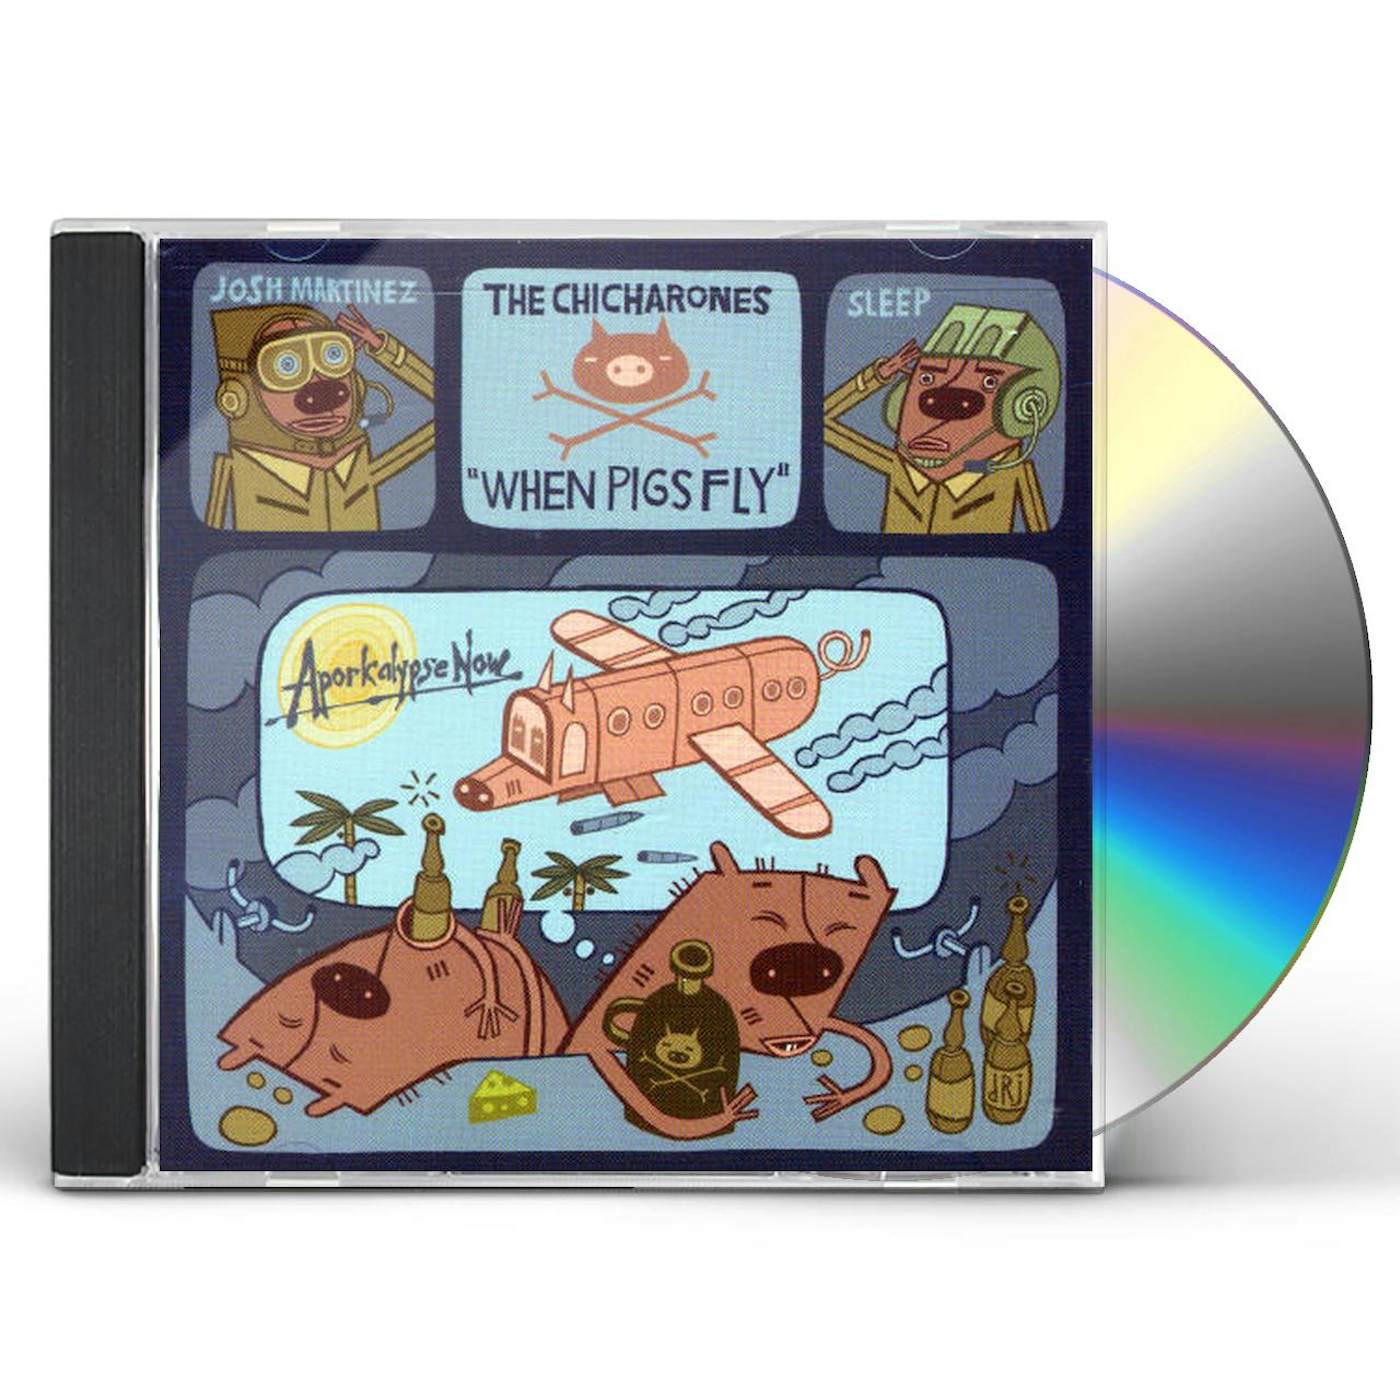 The Chicharones WHEN PIGS FLY CD